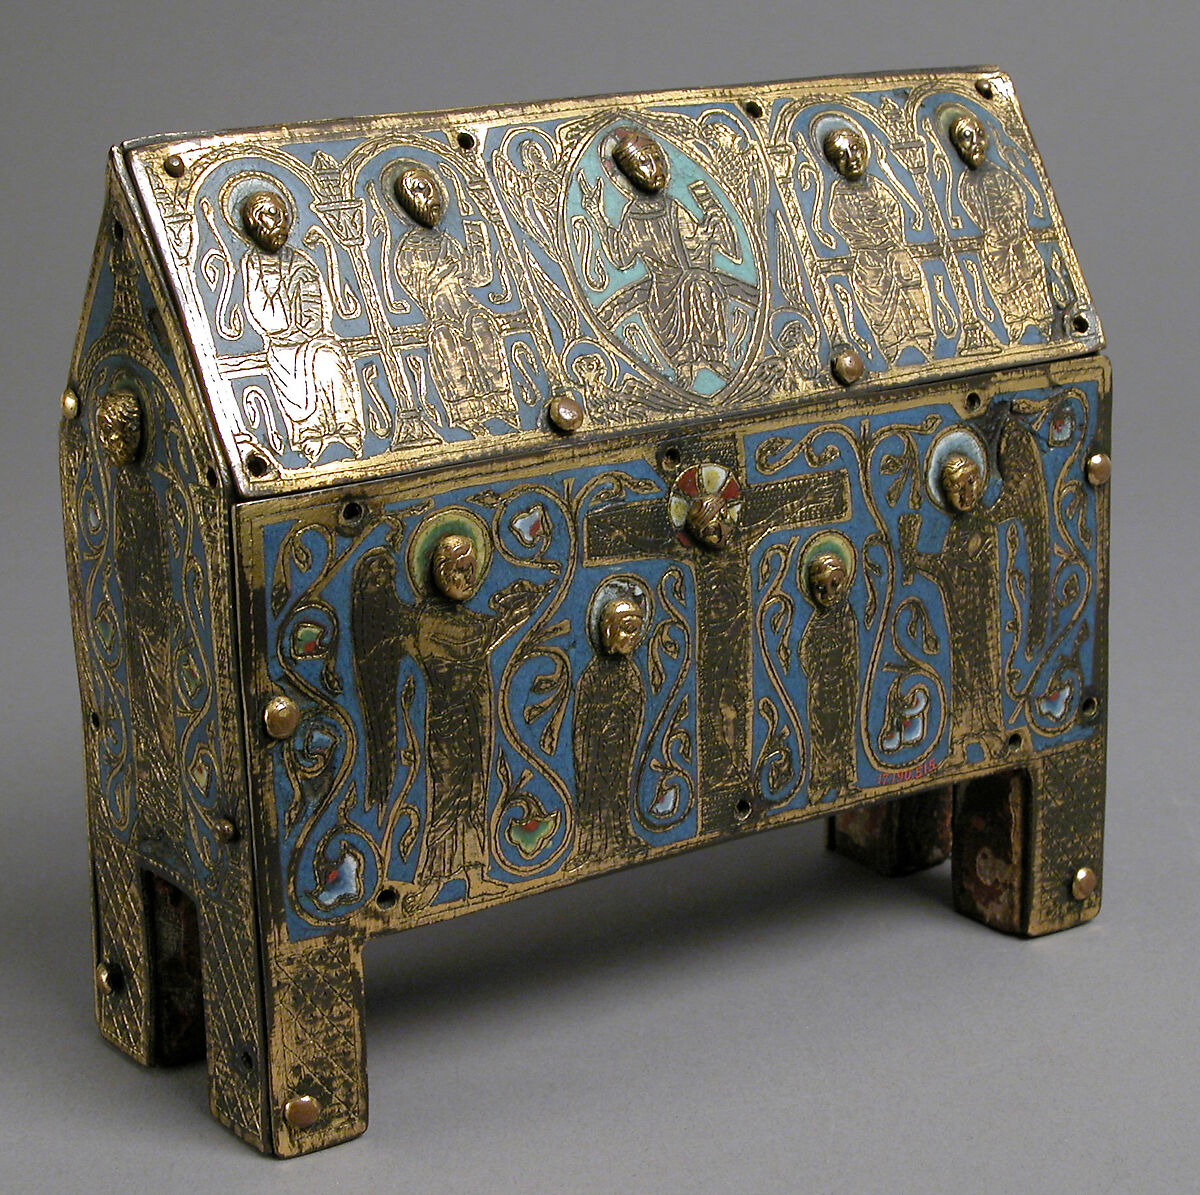 Chasse, Champlevé enamel, copper-gilt over wood core, French 